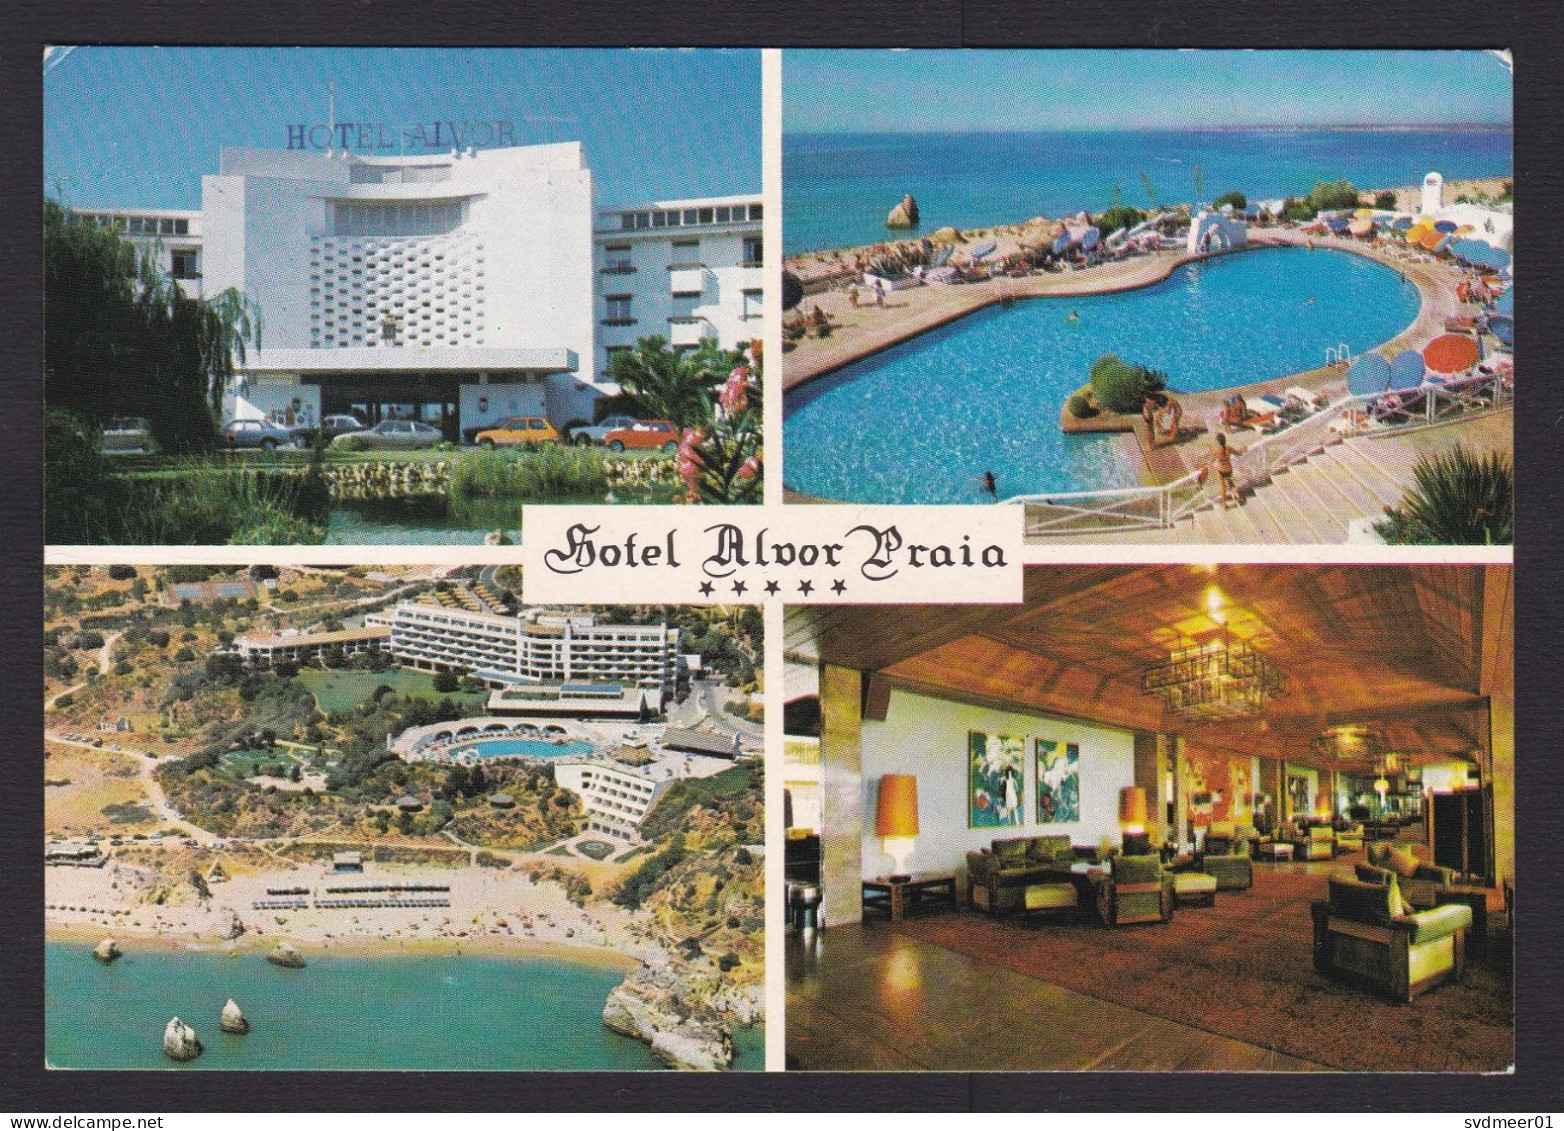 Portugal: Picture Postcard To Germany, 1980s, 2 Stamps, Construction, Card: Hotel Alvor Praia, Portimao (traces Of Use) - Lettres & Documents